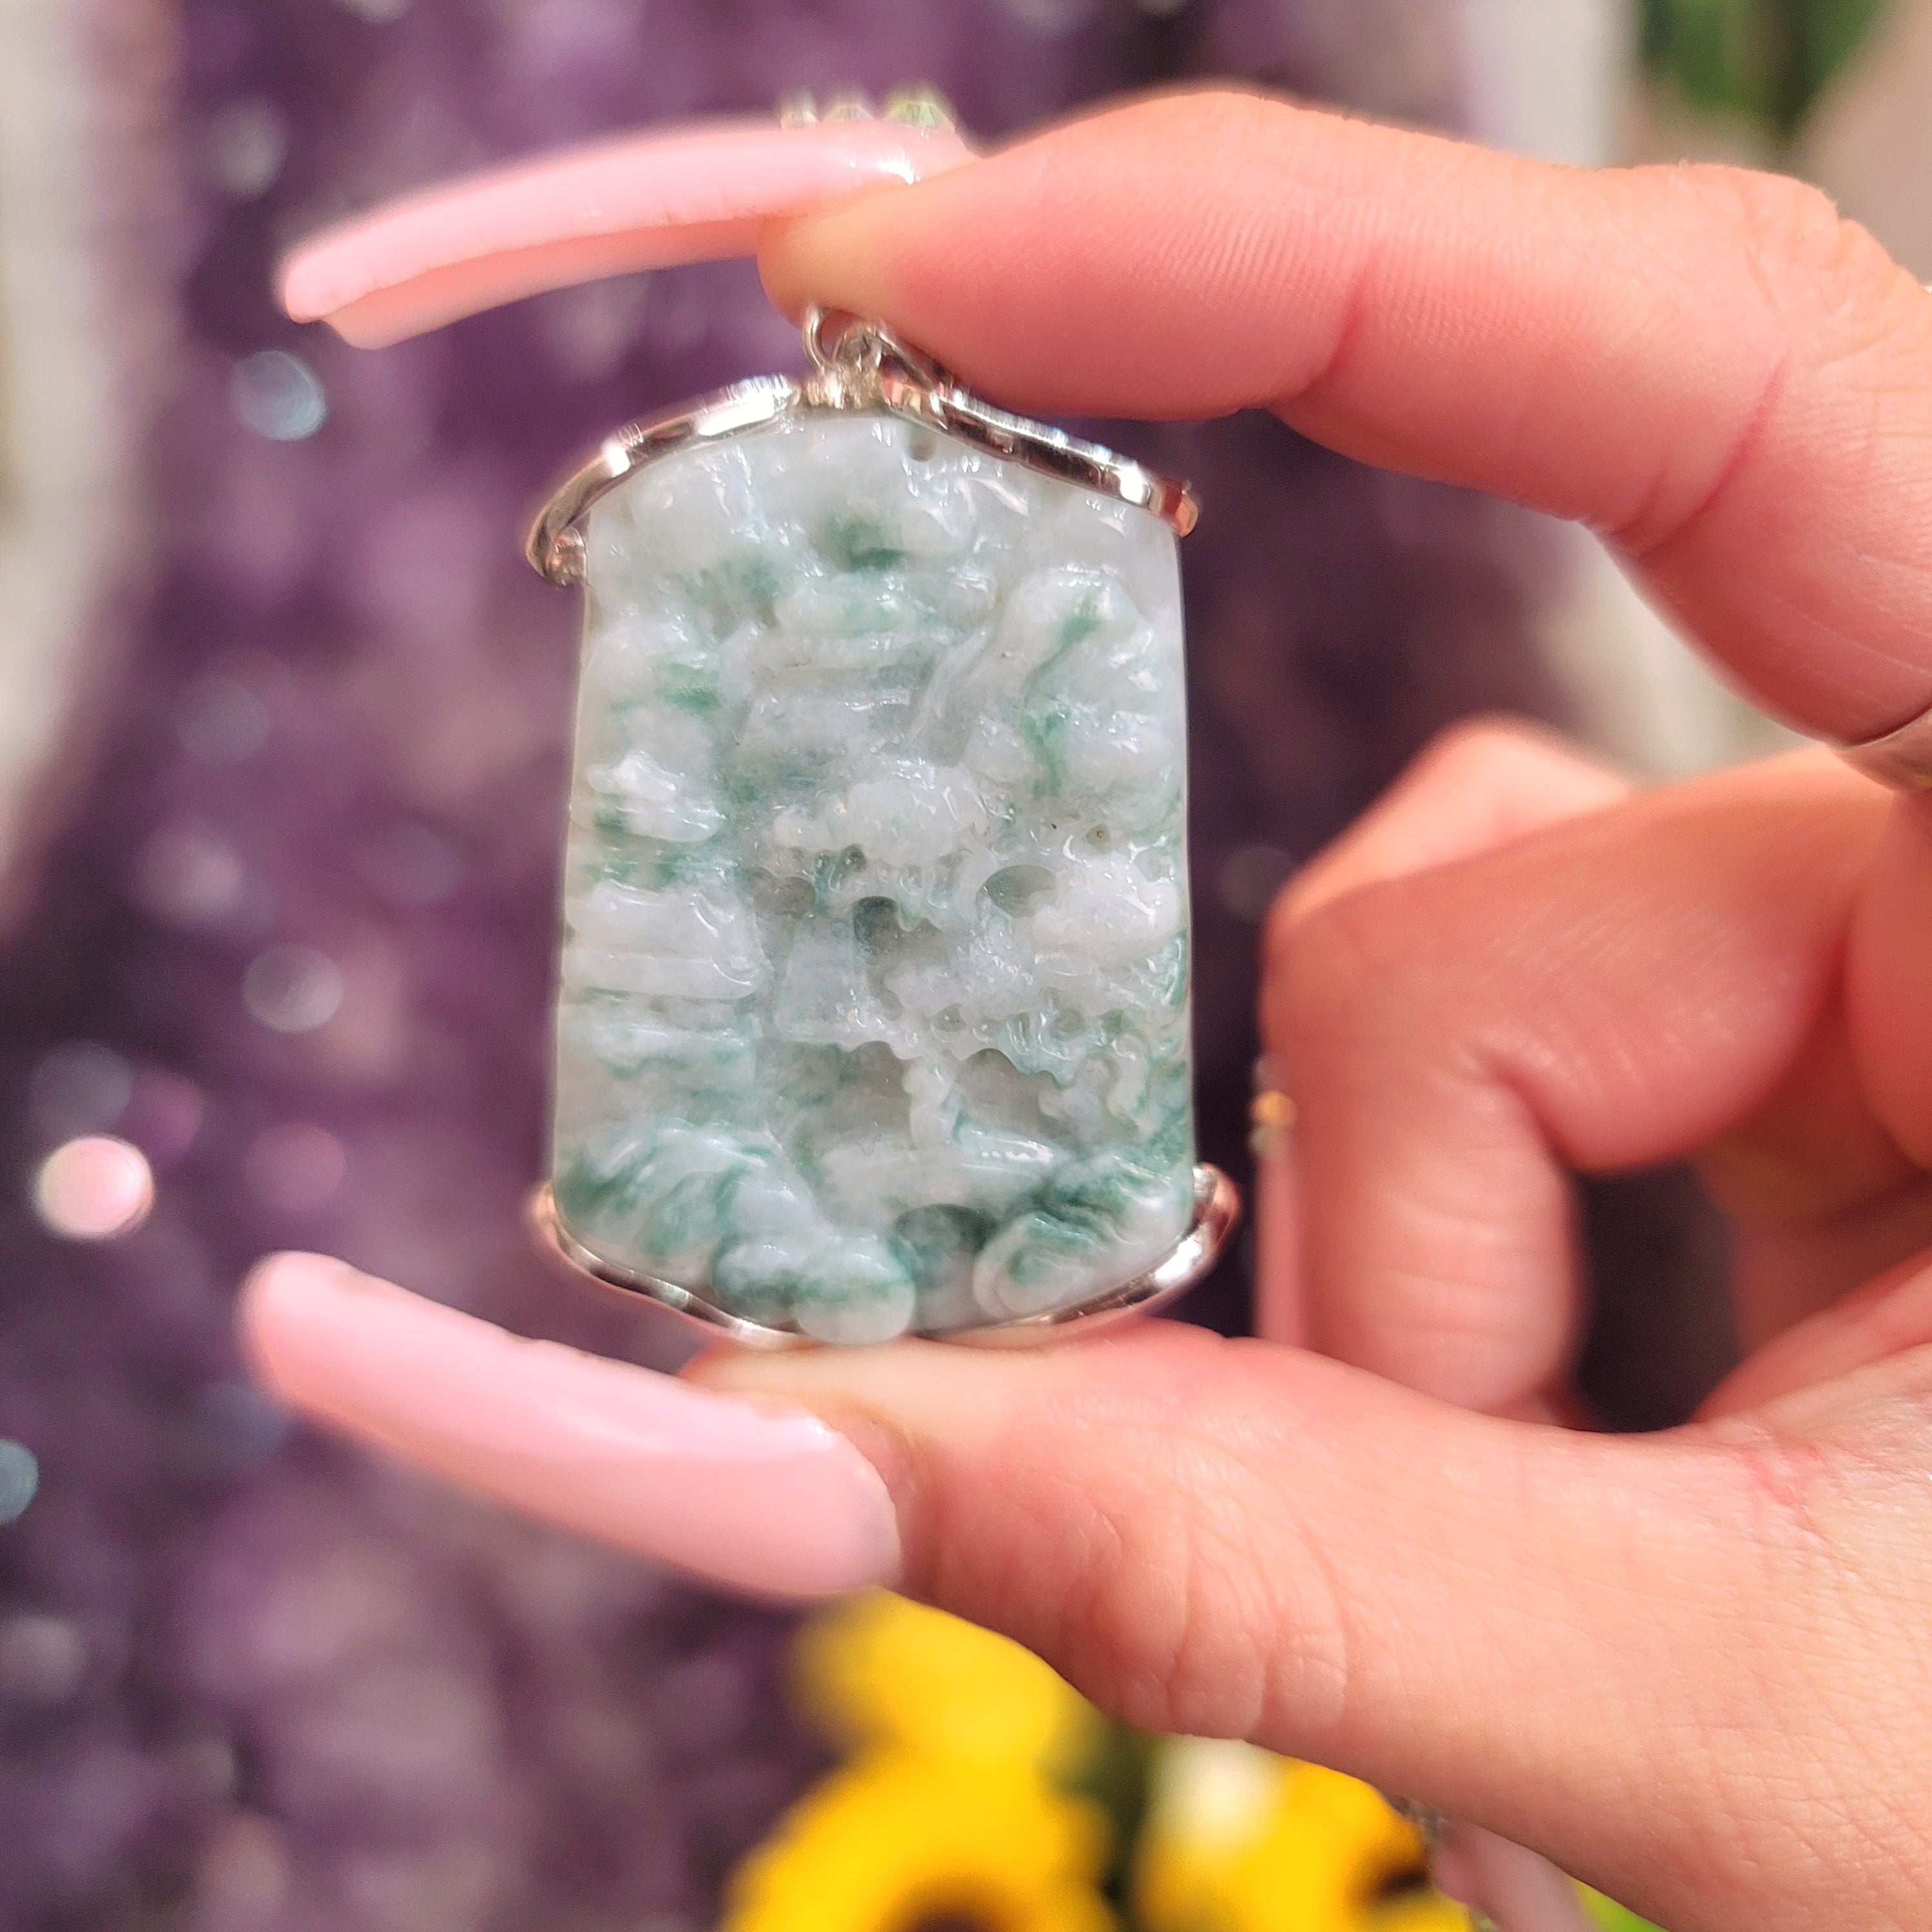 Jade Picture of Life Pendant for Good Luck, Prosperity and Serenity